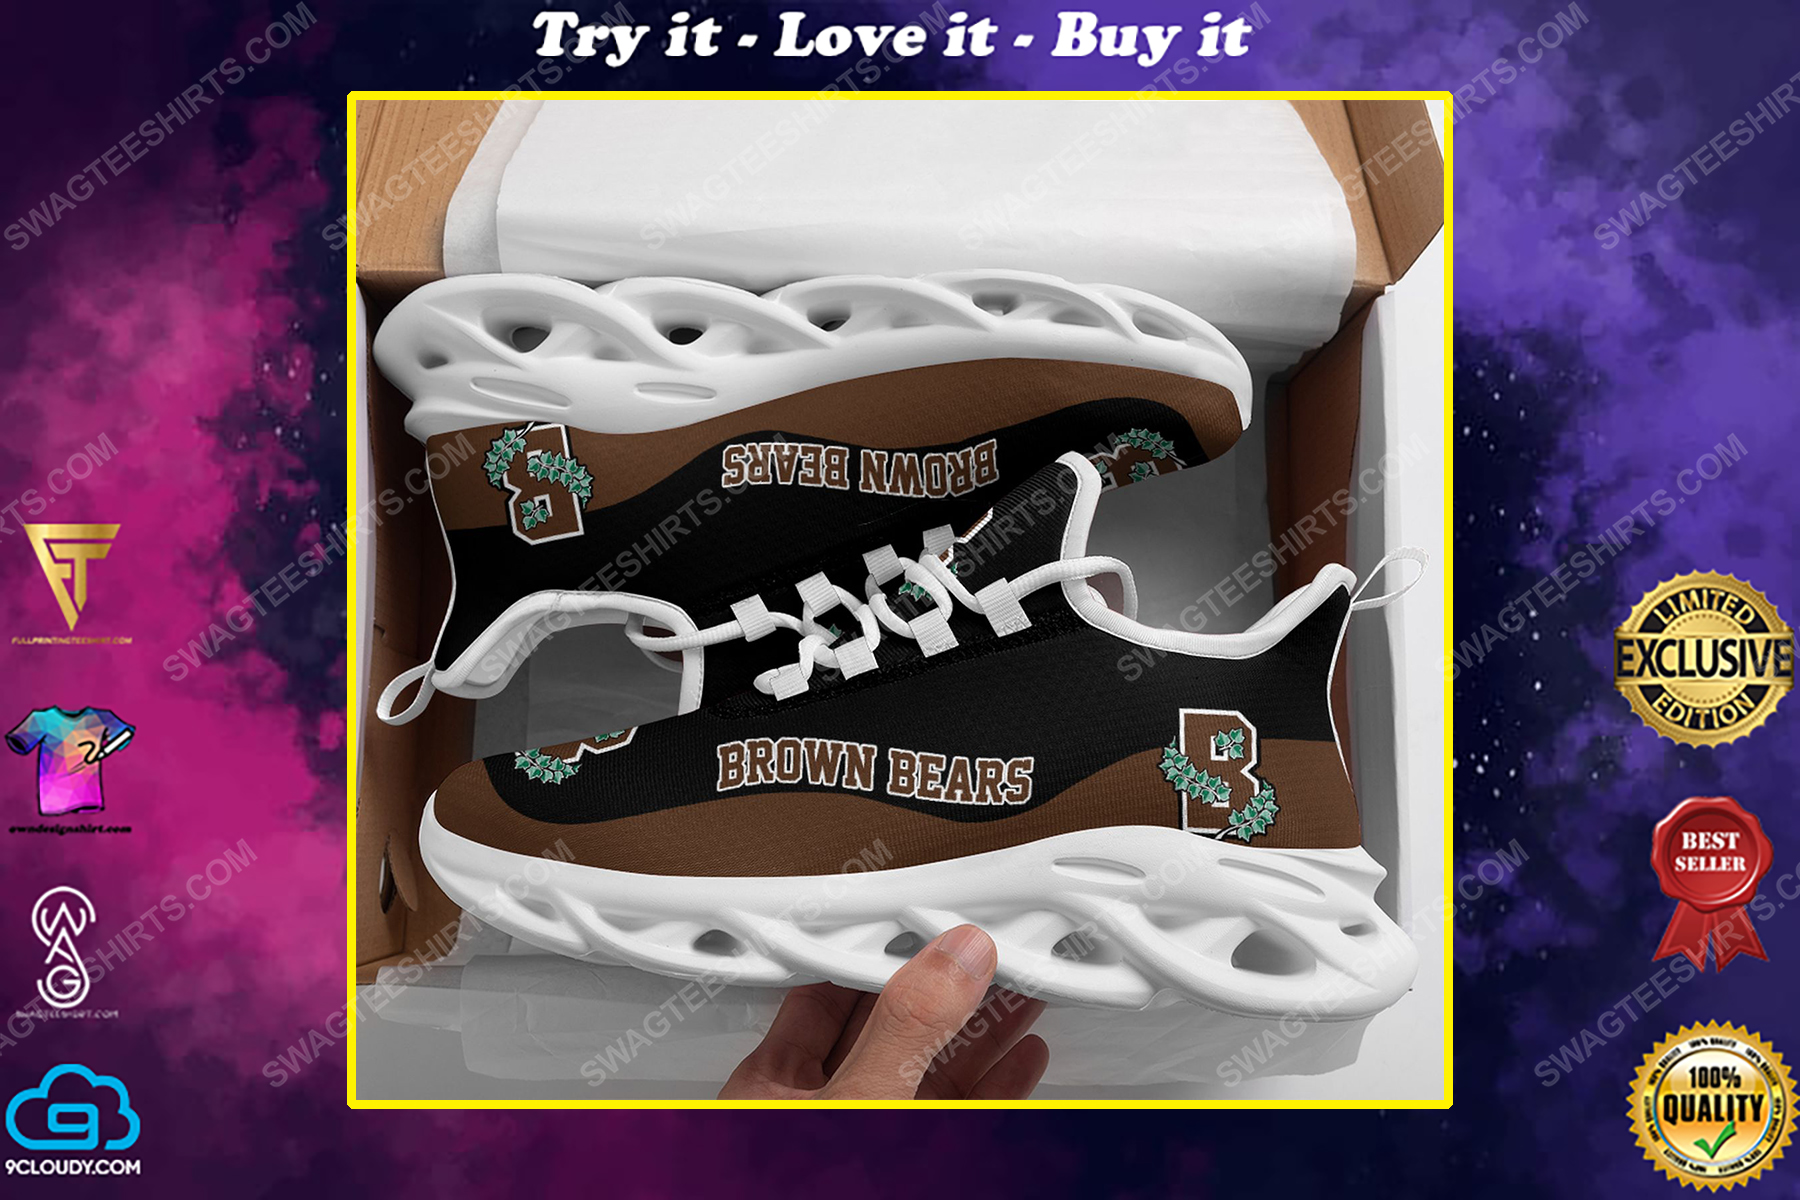 The brown bears football team max soul shoes